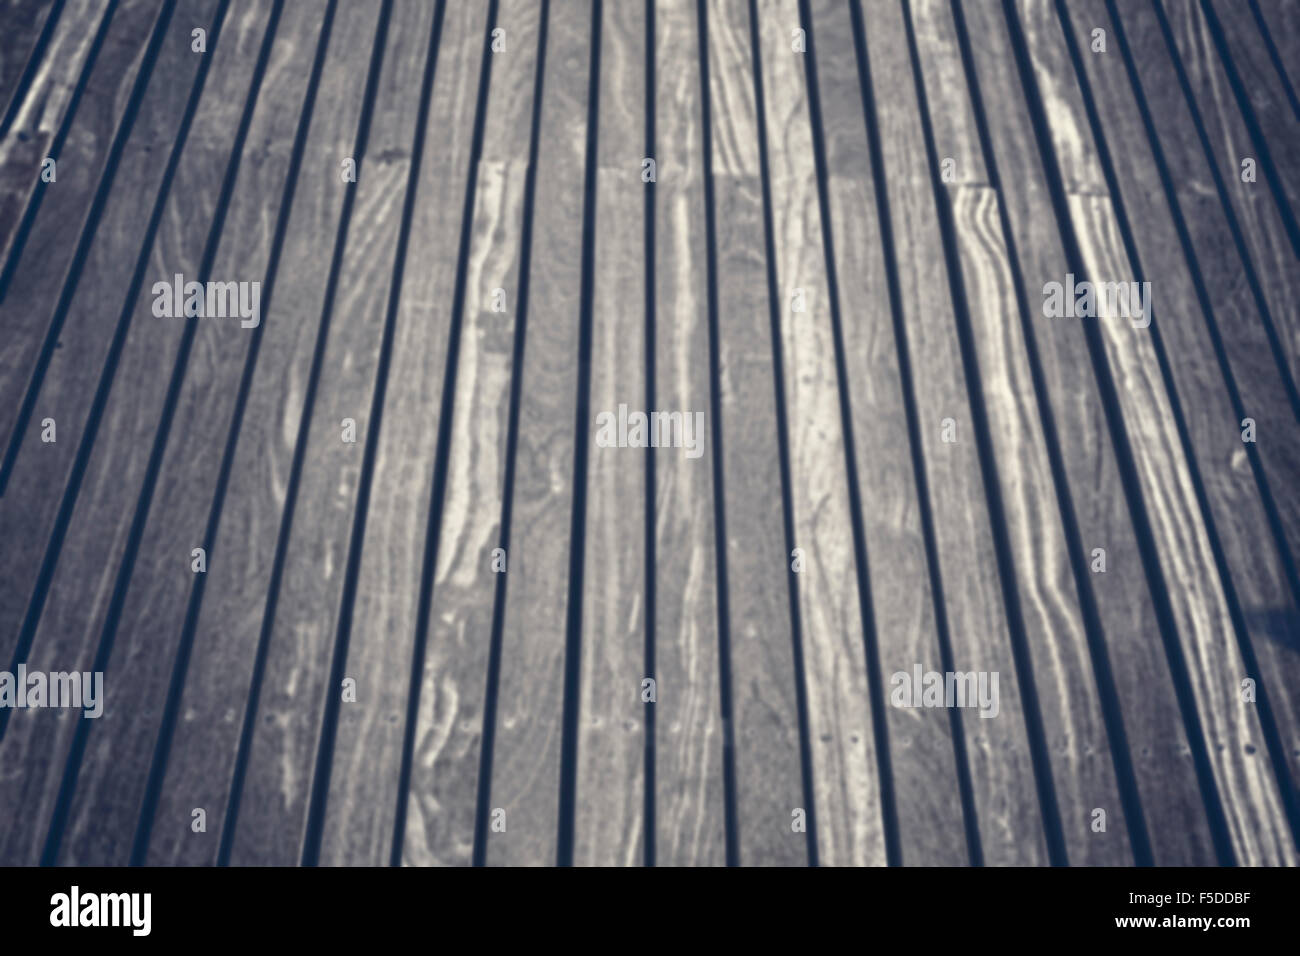 Vintage toned blurred wood background or texture. Stock Photo